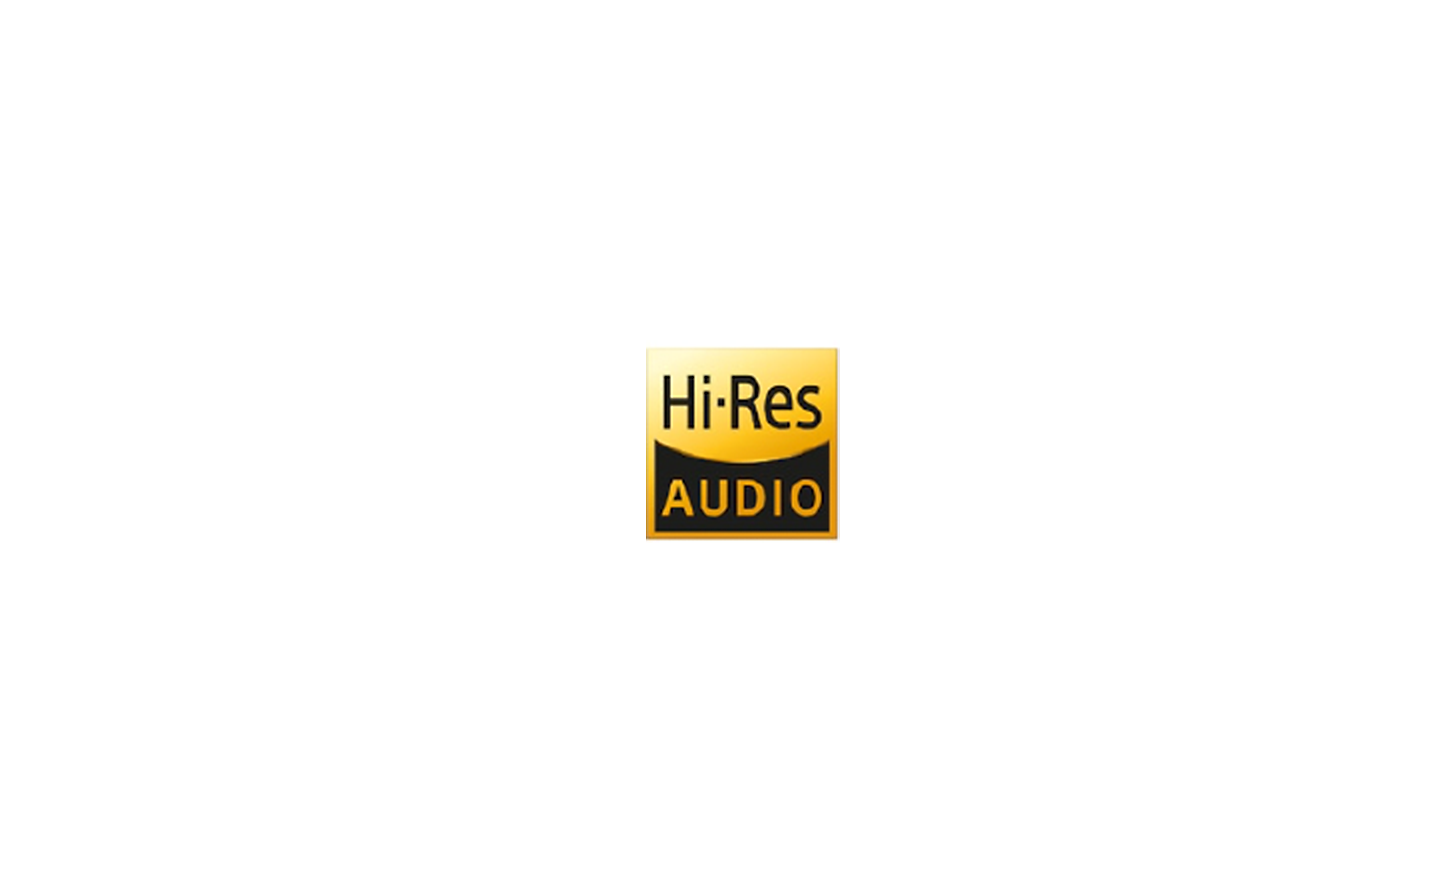 Image of a black and yellow Hi-Res AUDIO logo